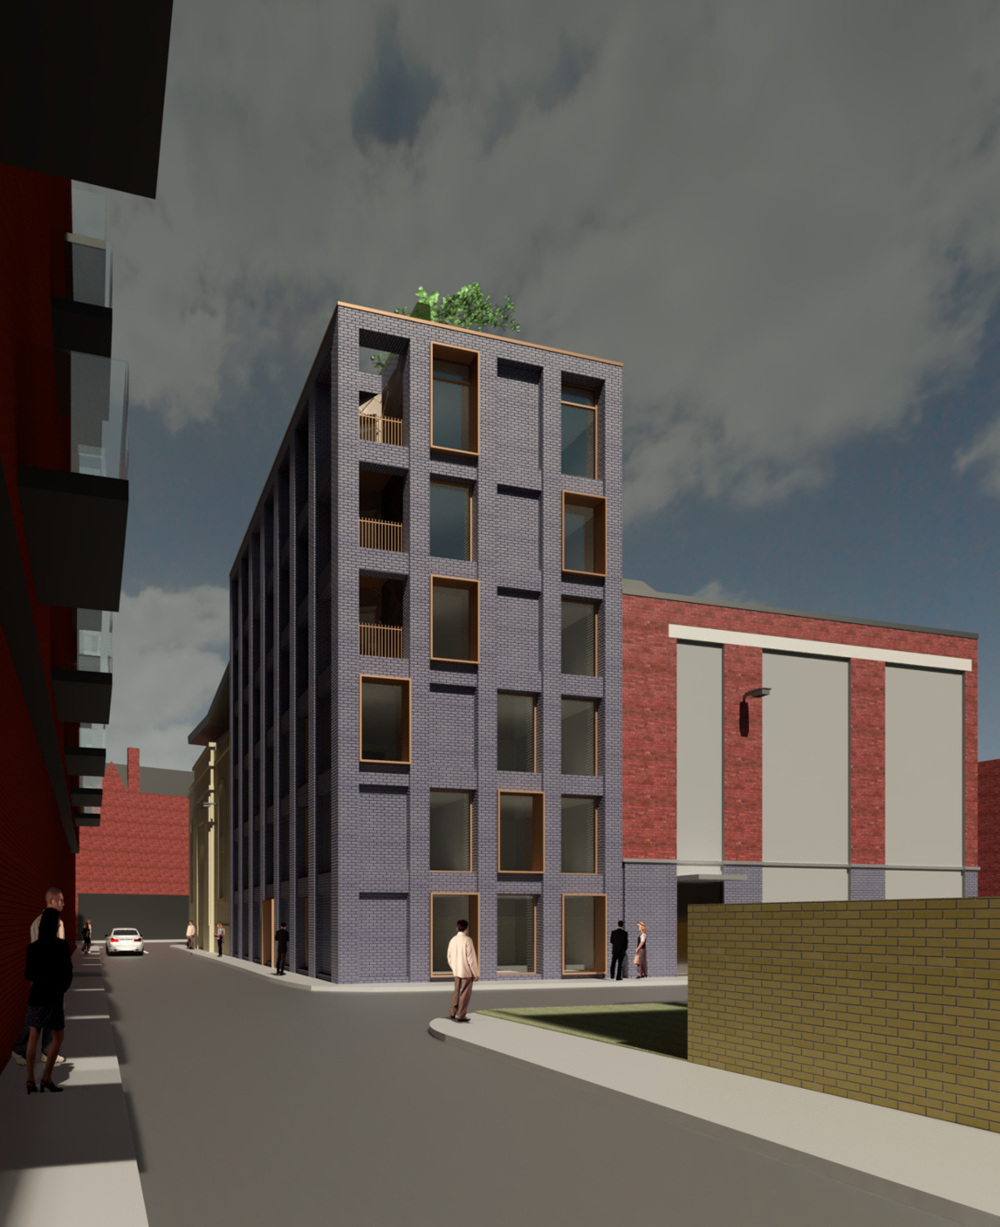 Mosaic submits plans for 18 serviced apartments on site of former Glasgow pub